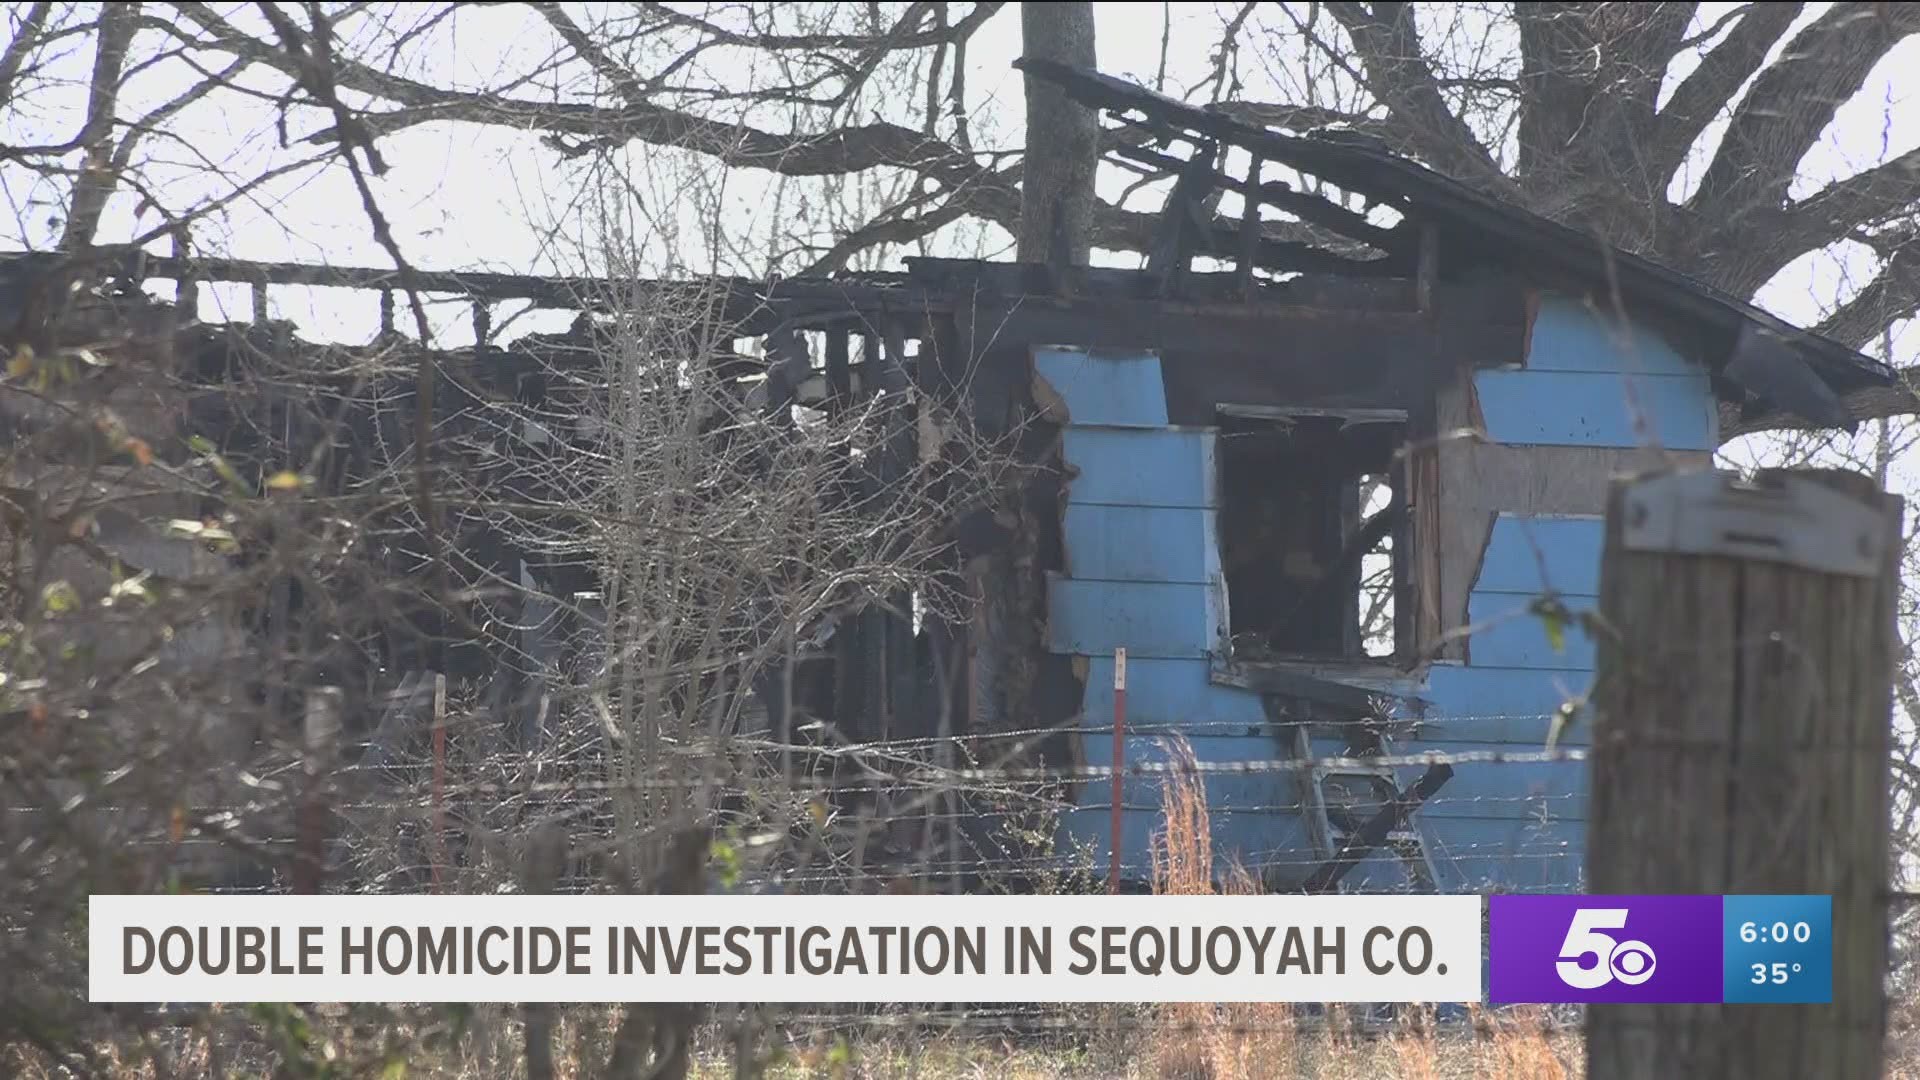 Firefighters located two bodies inside the home while working to put out the flames on Sunday. https://bit.ly/3i0RChq